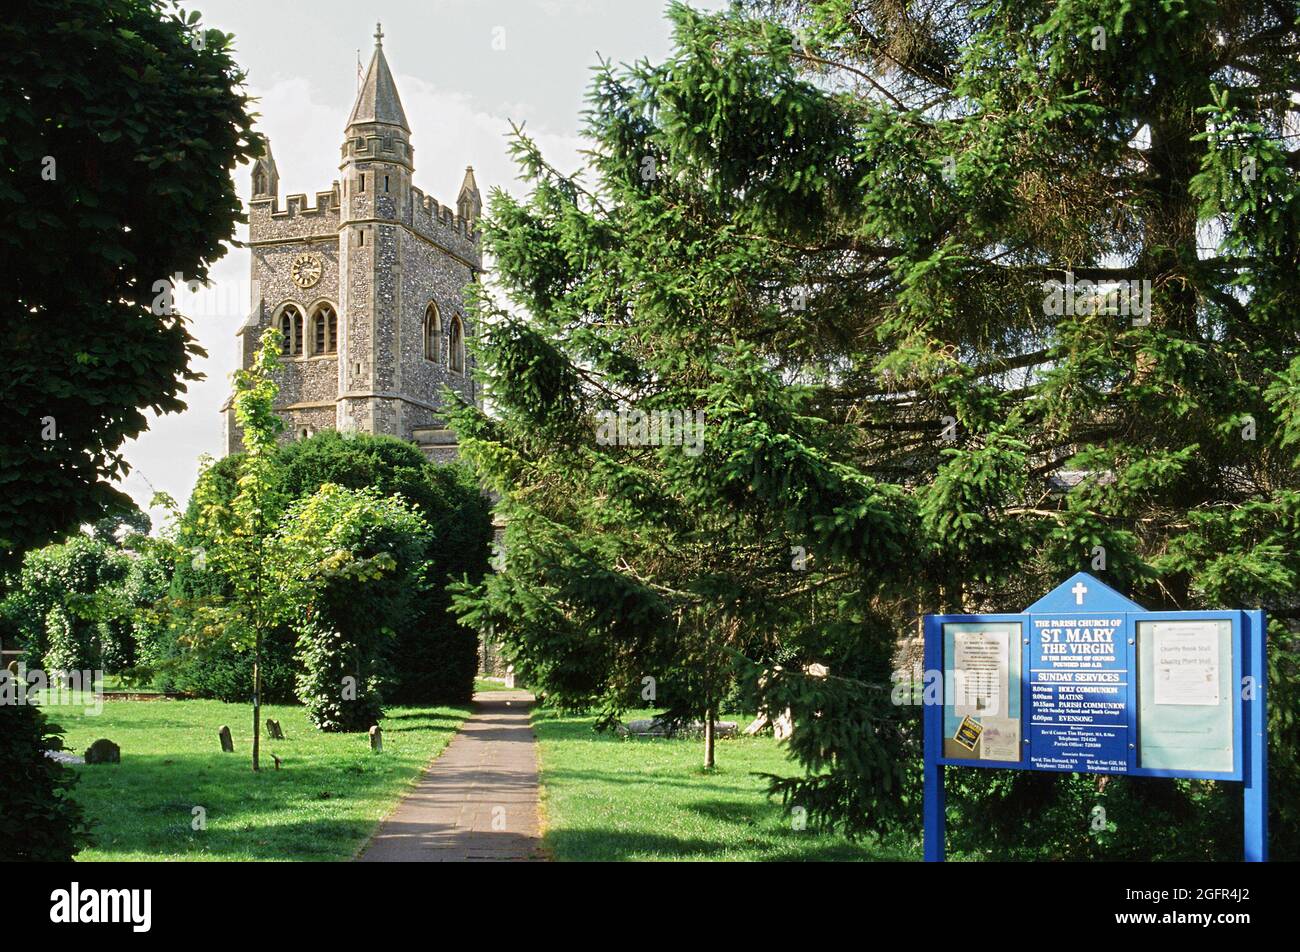 St Mary's church tower and churchyard at Old Amersham, Buckinghamshire, Southern England Stock Photo